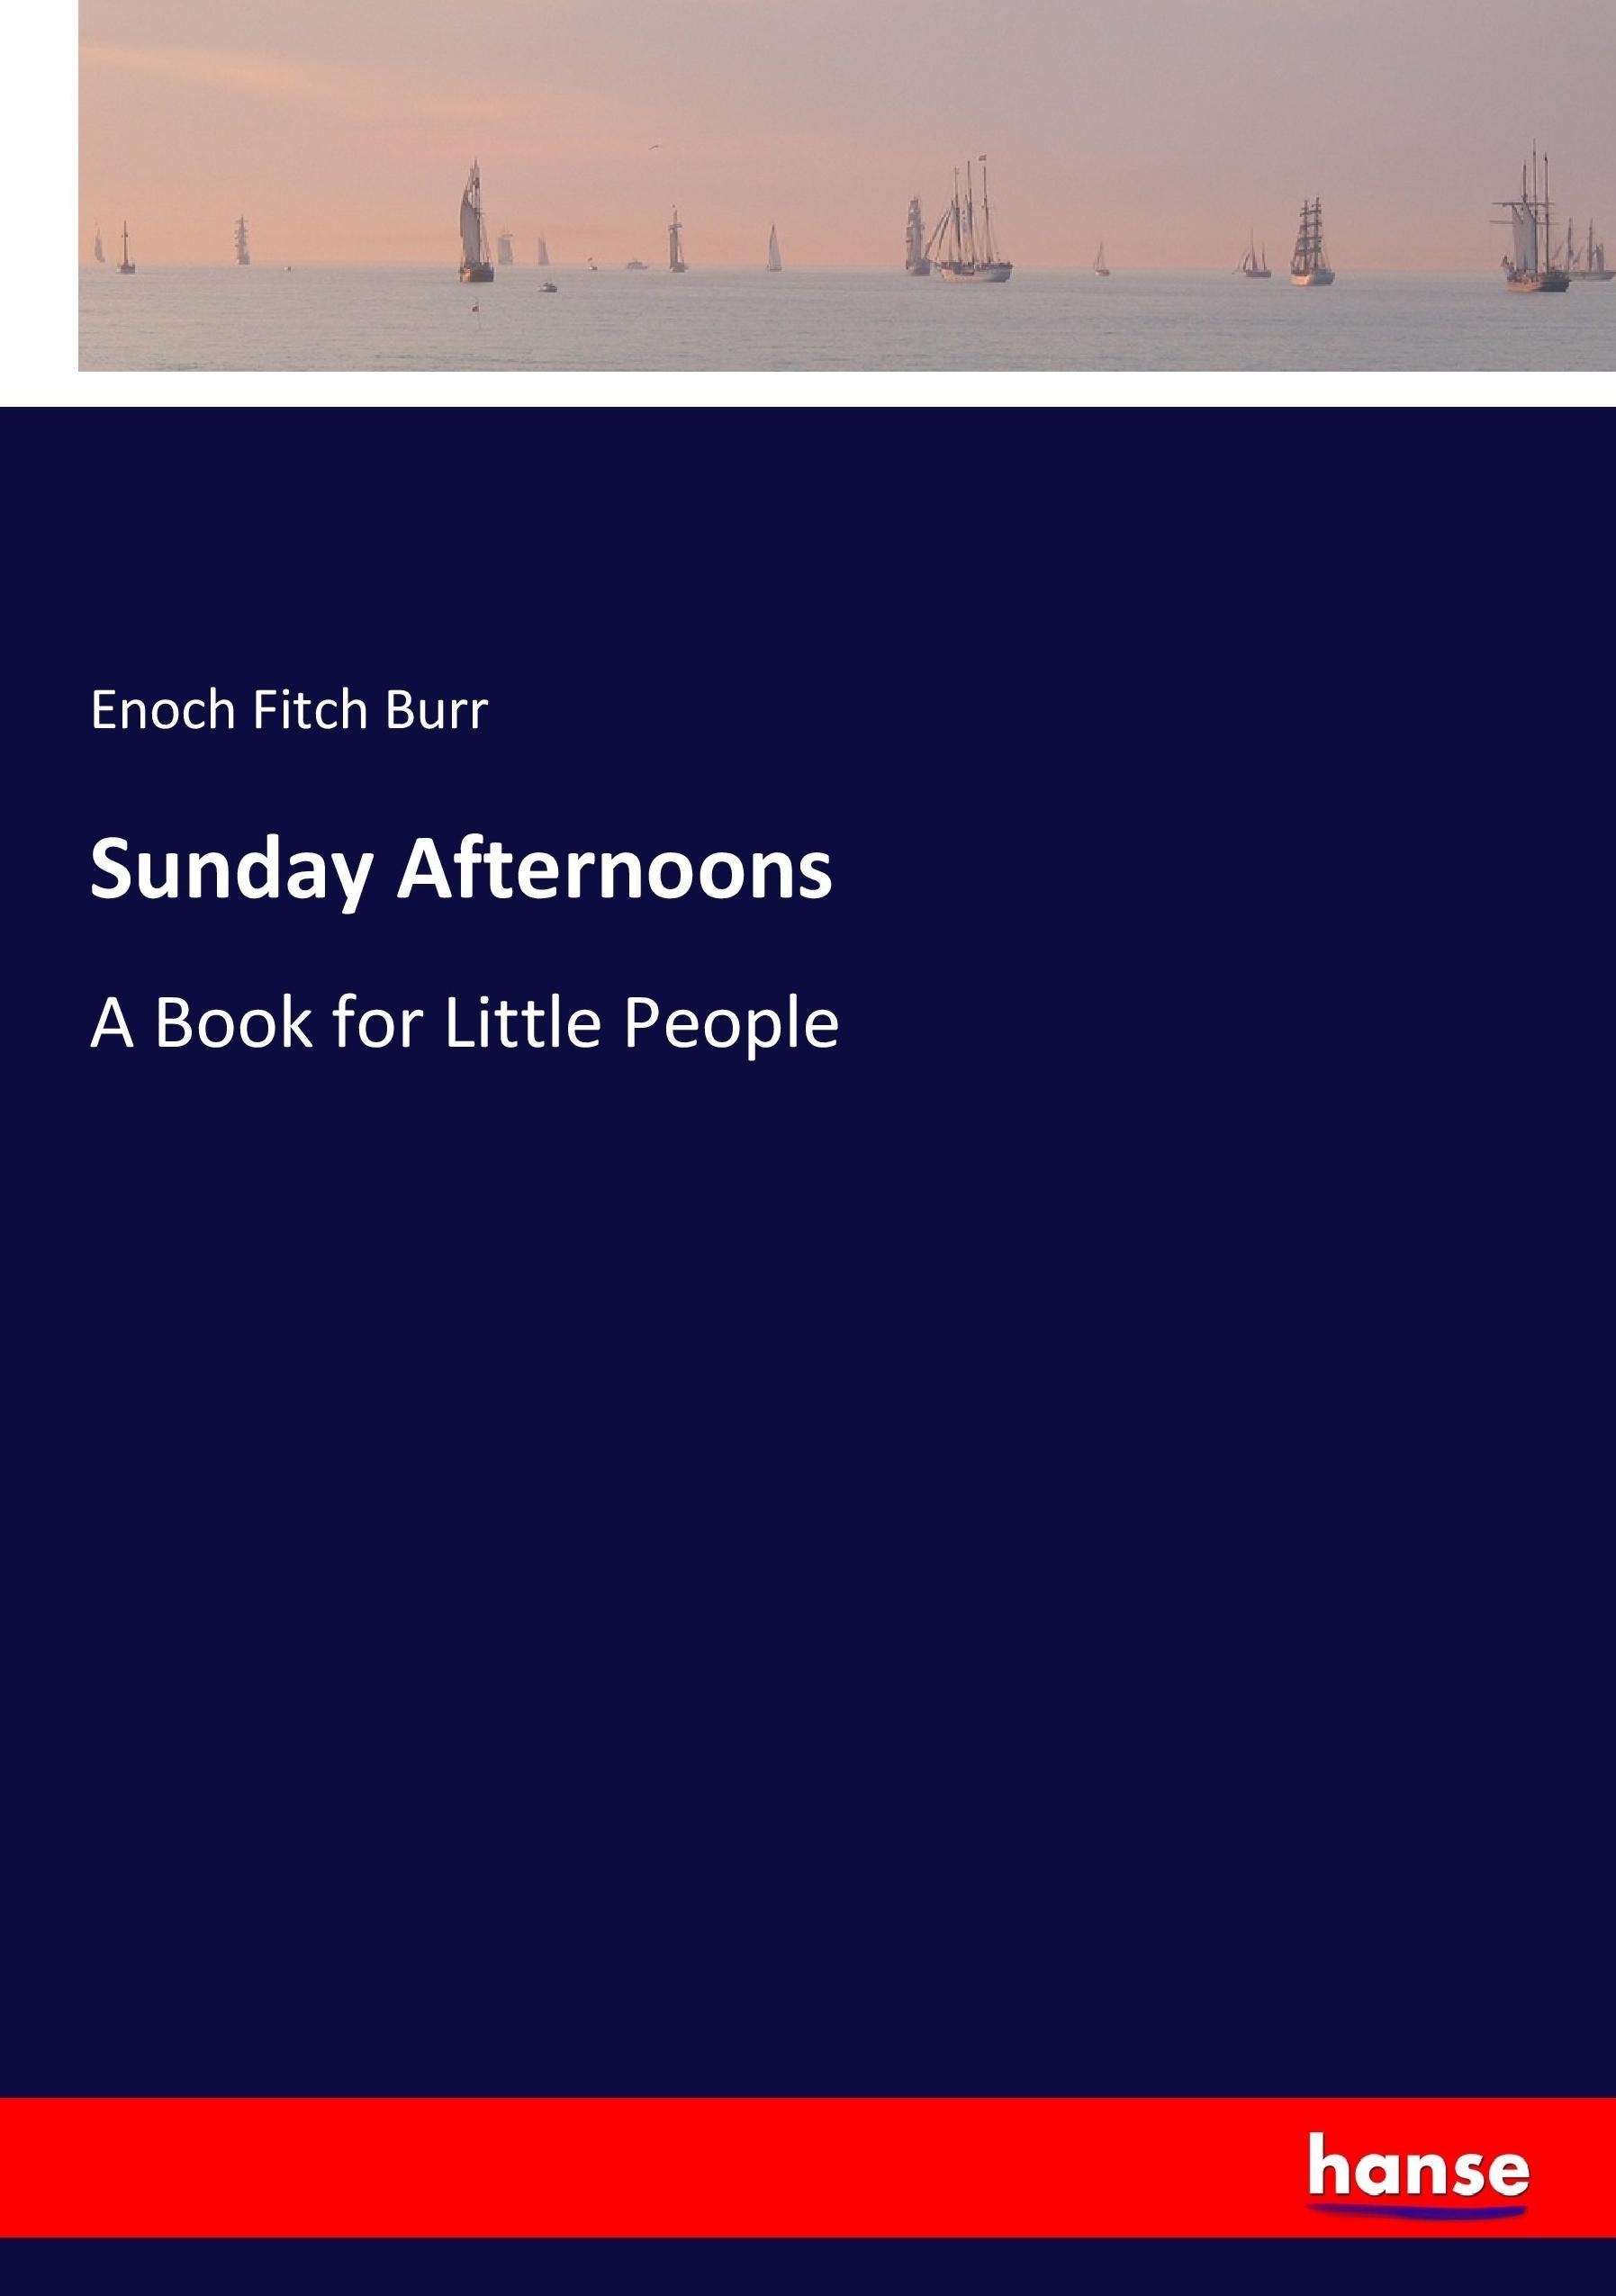 Sunday Afternoons | A Book for Little People | Enoch Fitch Burr | Taschenbuch | Paperback | 164 S. | Englisch | 2017 | hansebooks | EAN 9783744746366 - Burr, Enoch Fitch